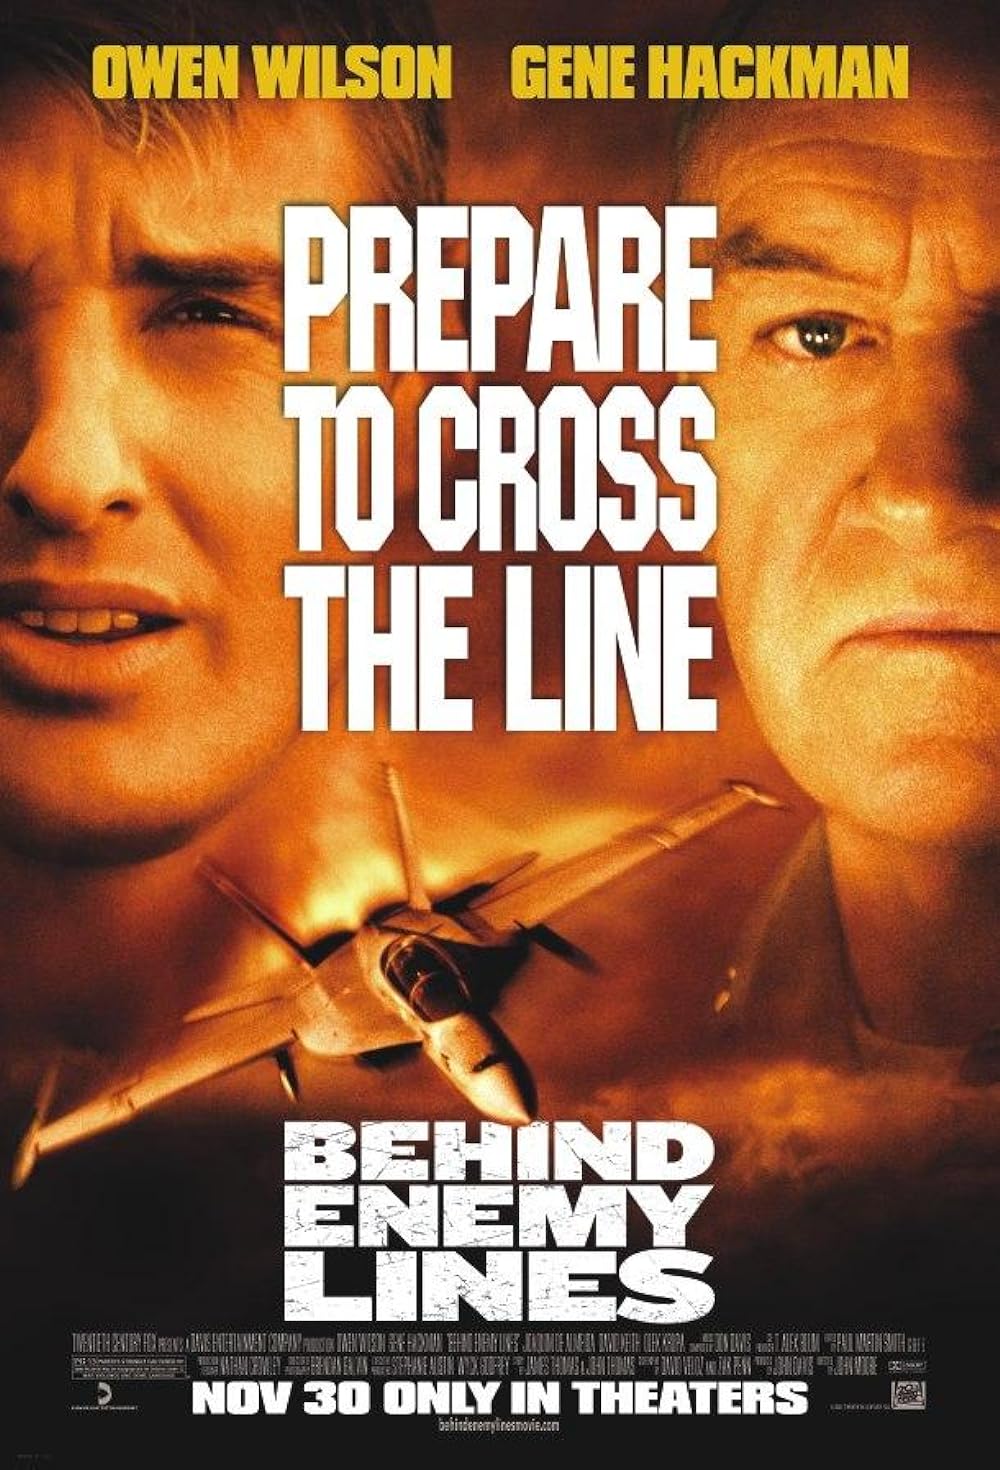 Behind Enemy Lines (2001) 192Kbps 23.976Fps 48.0kHz 2Ch BluRay Tr Audio